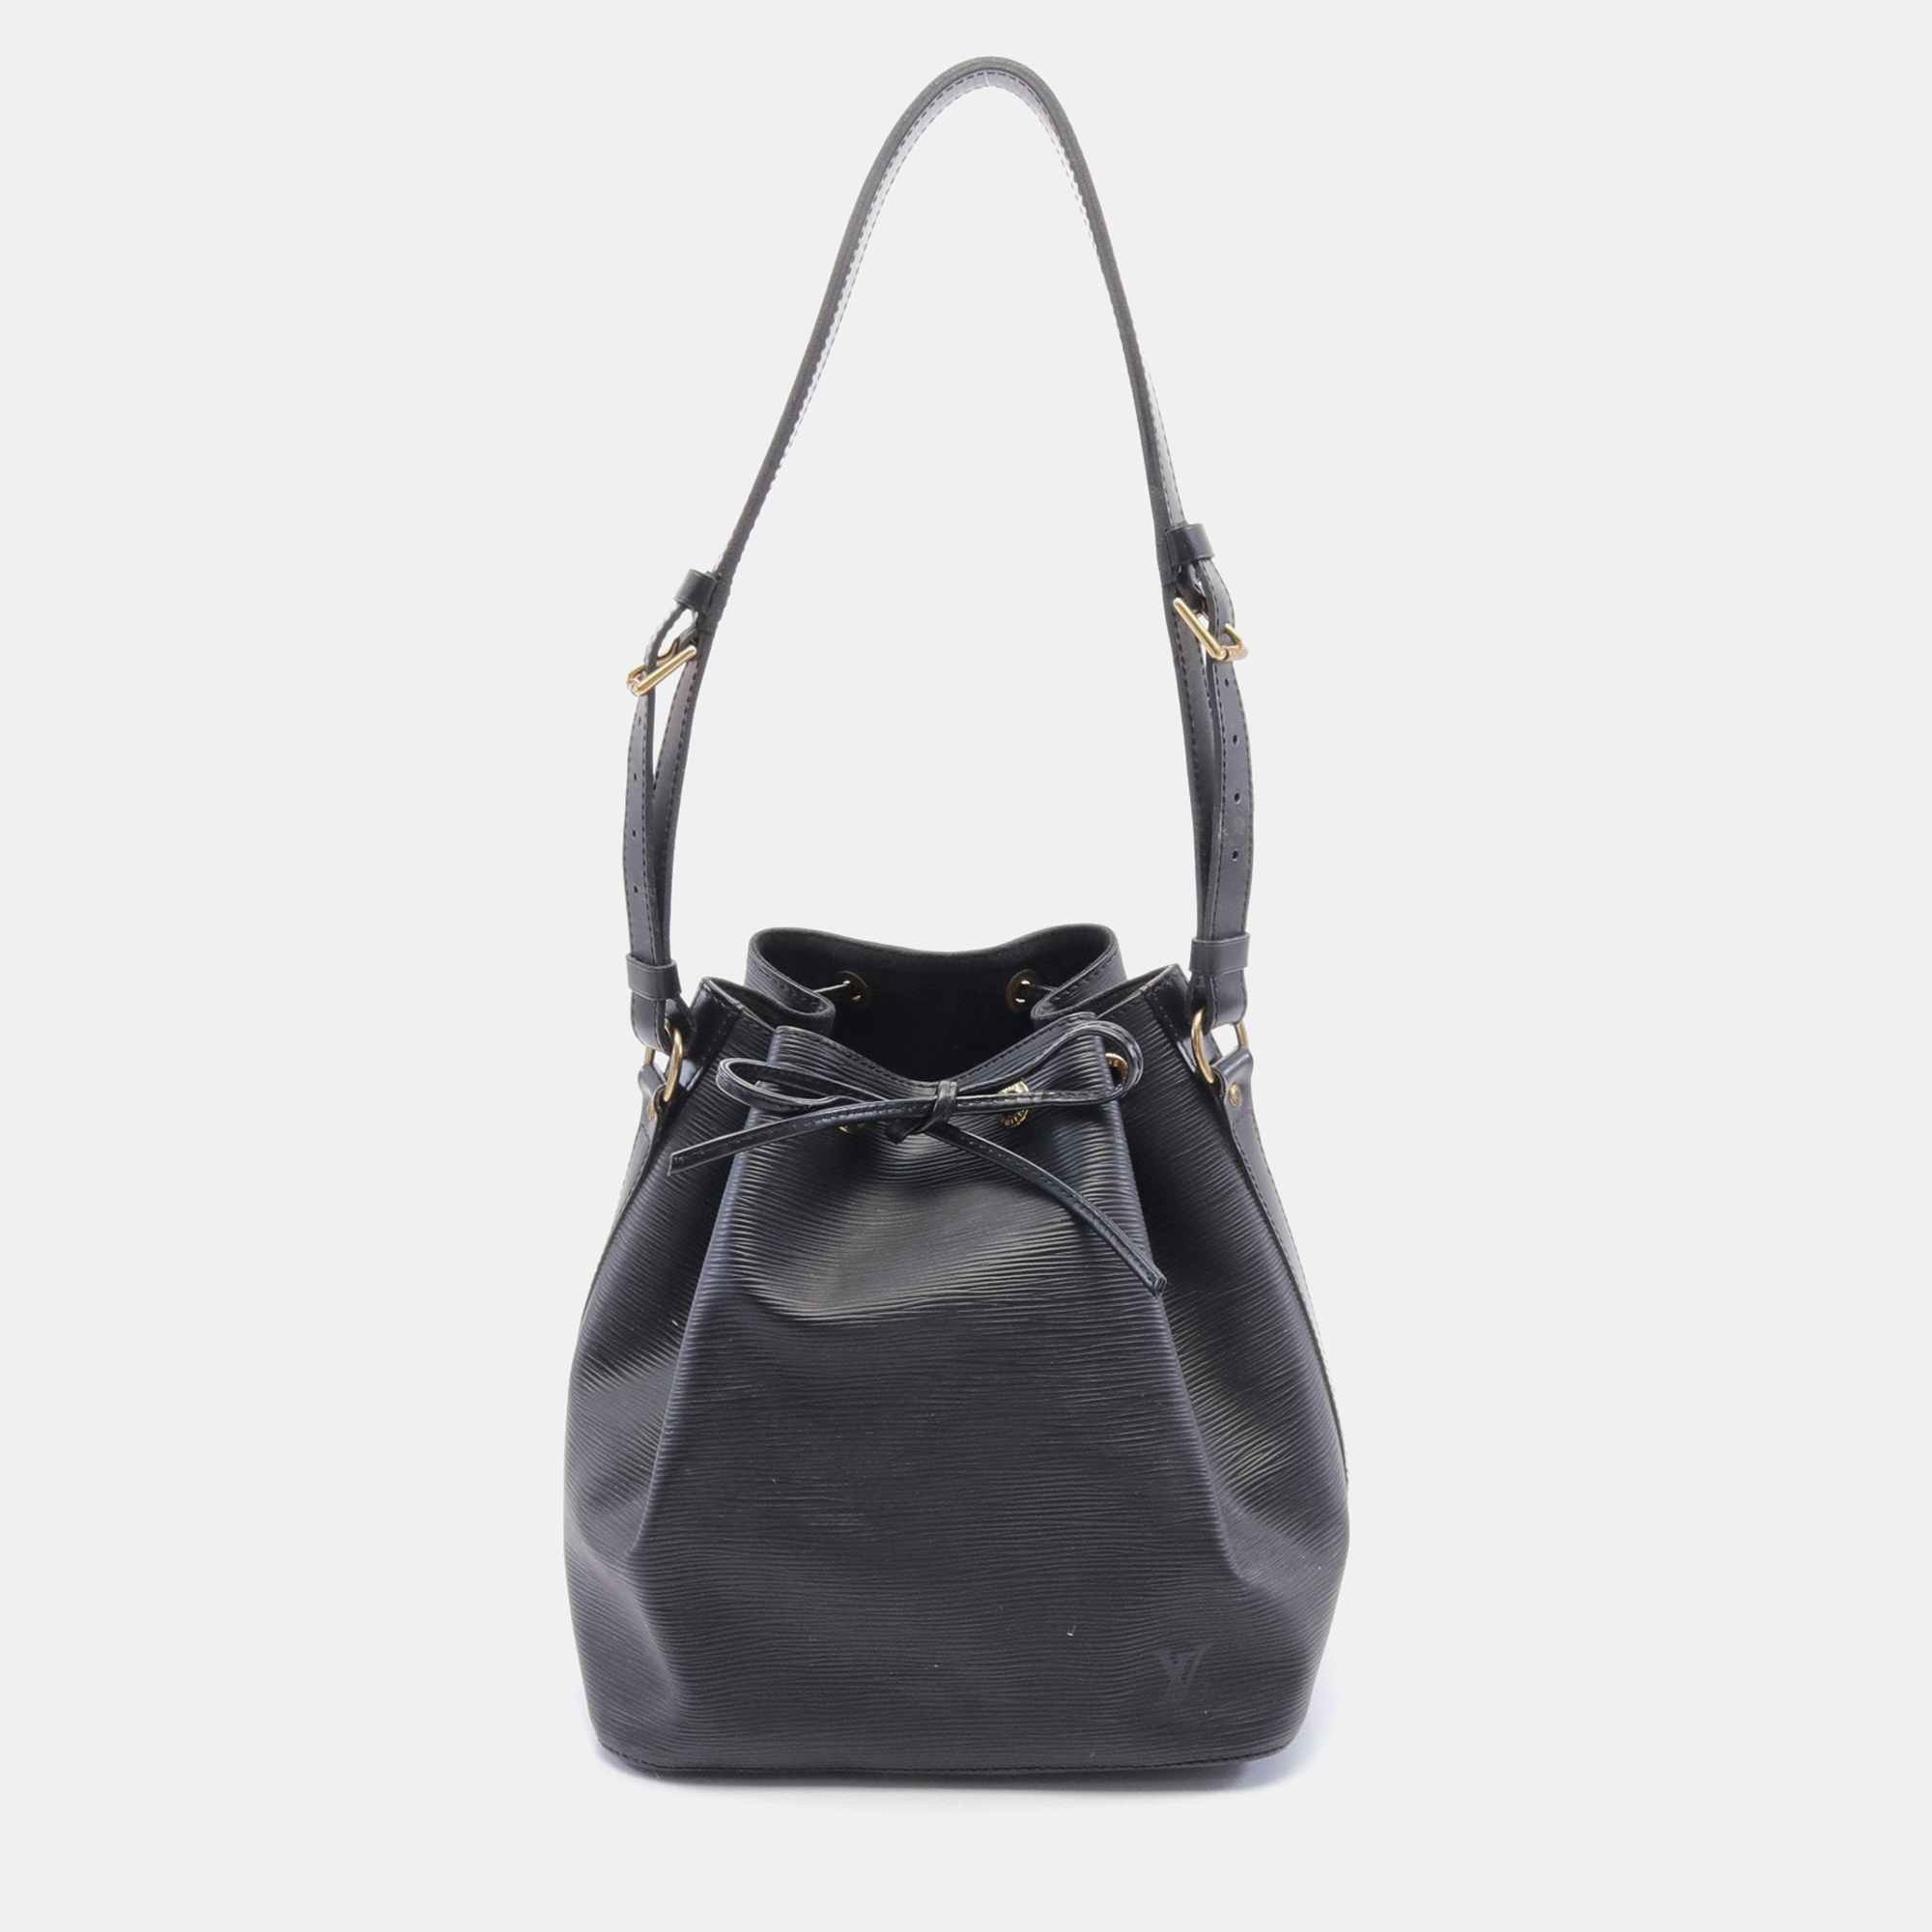 Carry this lovely designer bag as a stylish accompaniment to your ensemble. Made from high quality materials it has a luxe look and durable quality.